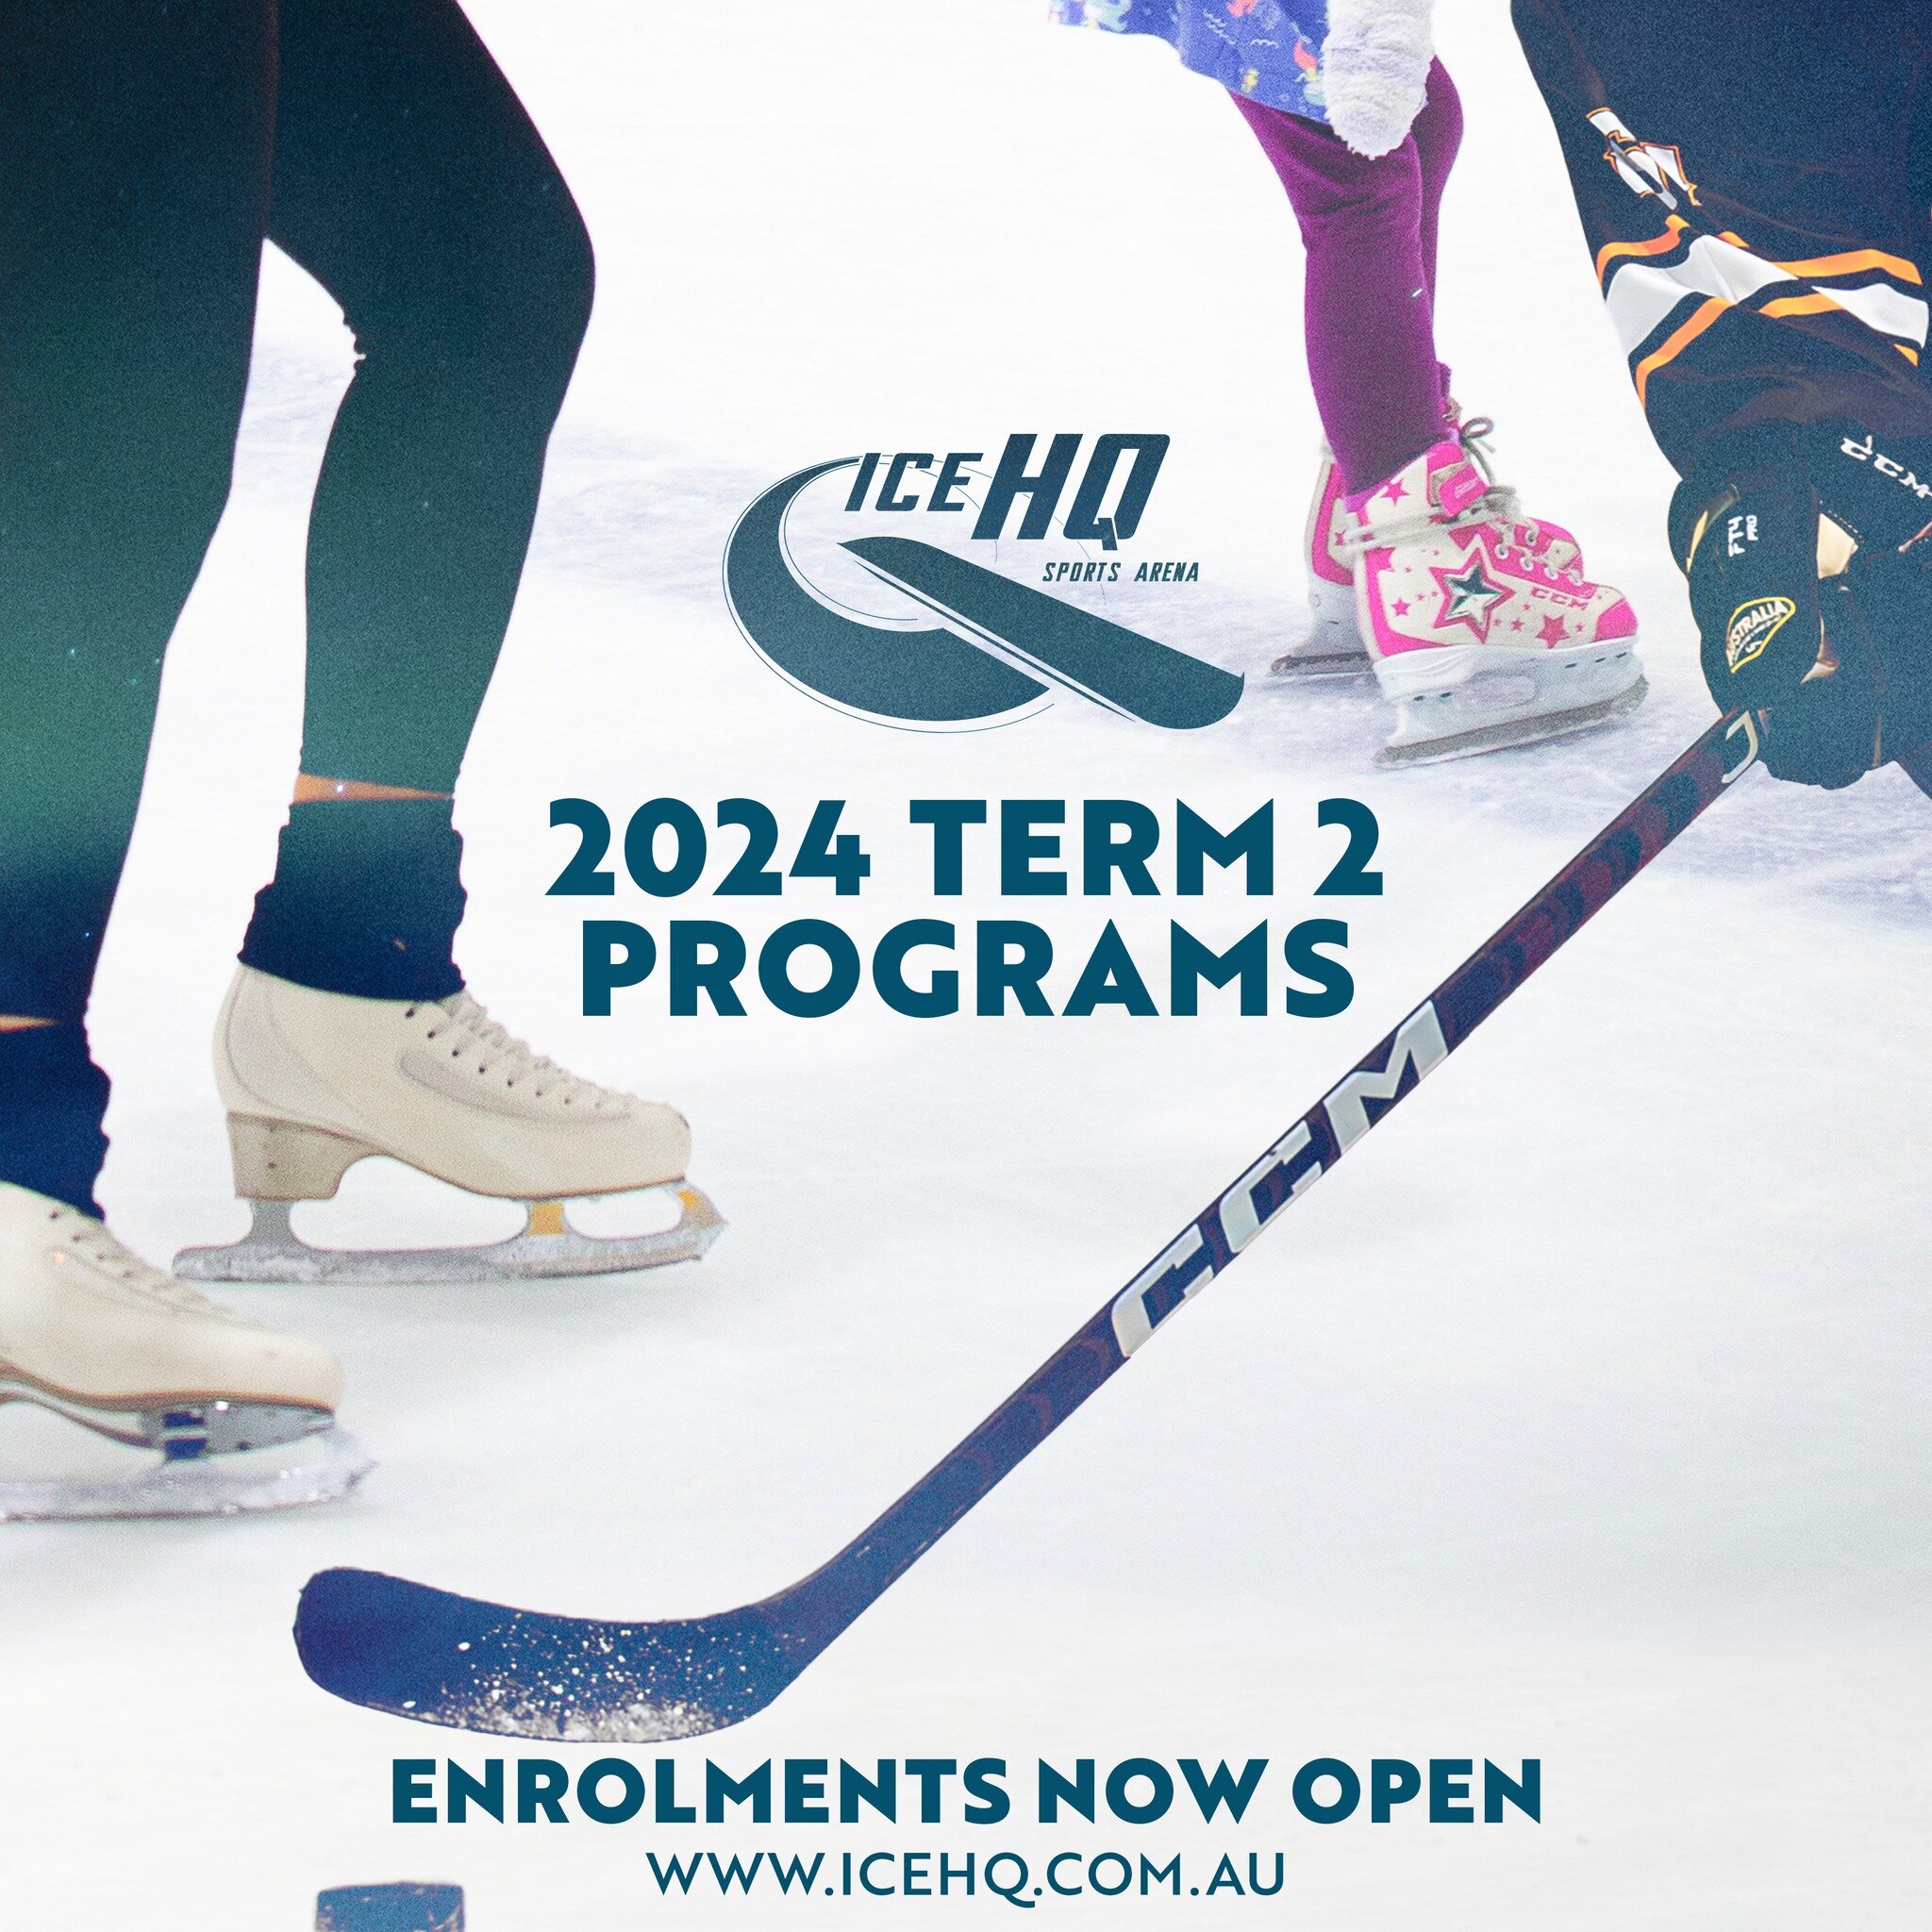 iceHQ Term 2 enrolments are now open 🤗⛸️🏒

Classes start the week of April 15th, do not delay in enrolling! Places are strictly limited and most will sell out!

⛸️ Skate School: Mondays 5pm-7pm, Wednesdays 5pm-6pm and Saturdays 9:30am-11:30am

⛸️ S